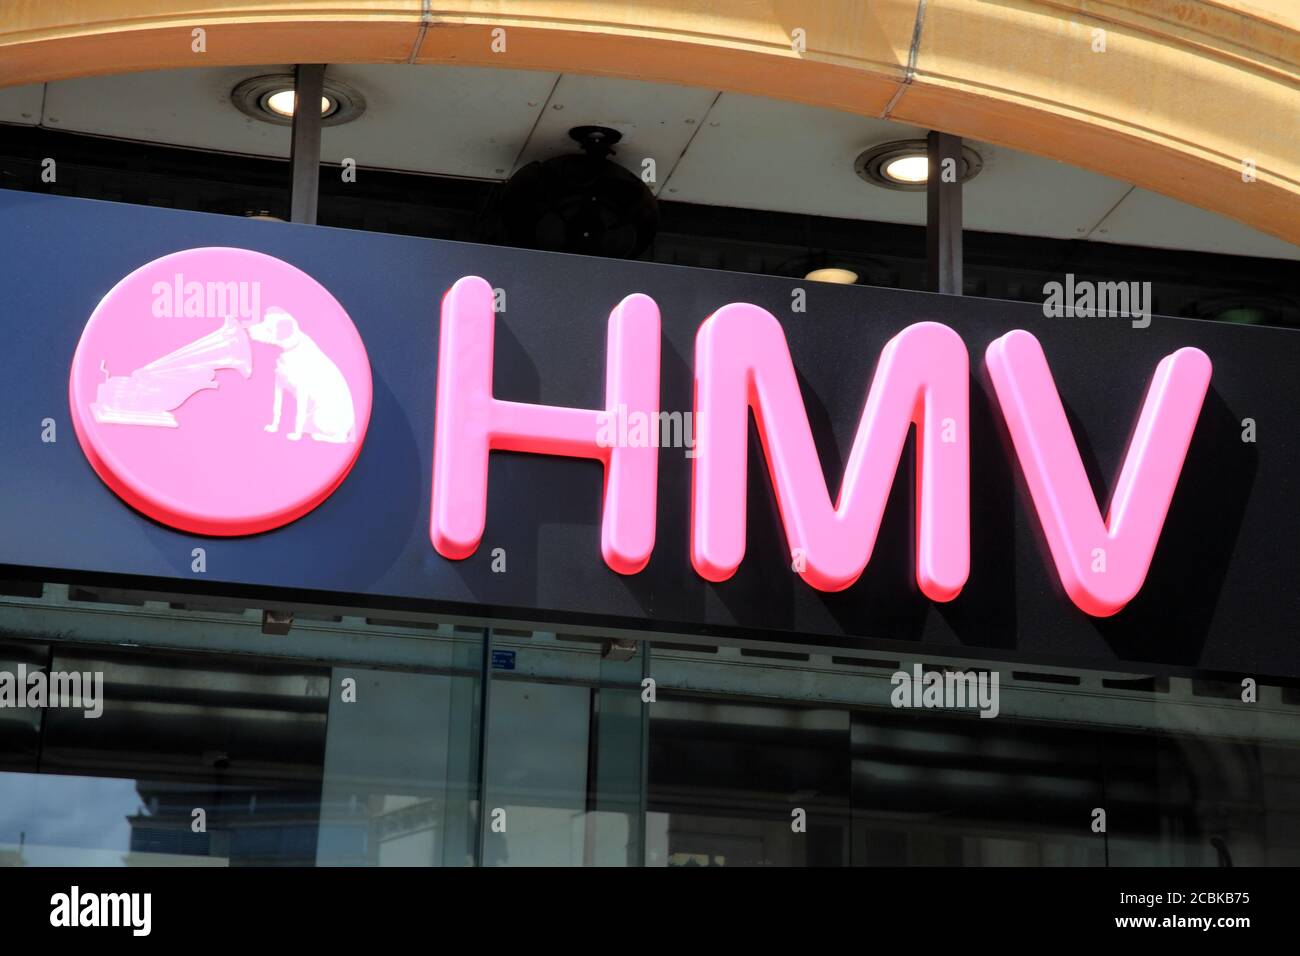 London, United Kingdom, May 8, 2011 : HMV Nipper logo advertising sign outside its retail  business store in Leicester Square stock photo Stock Photo